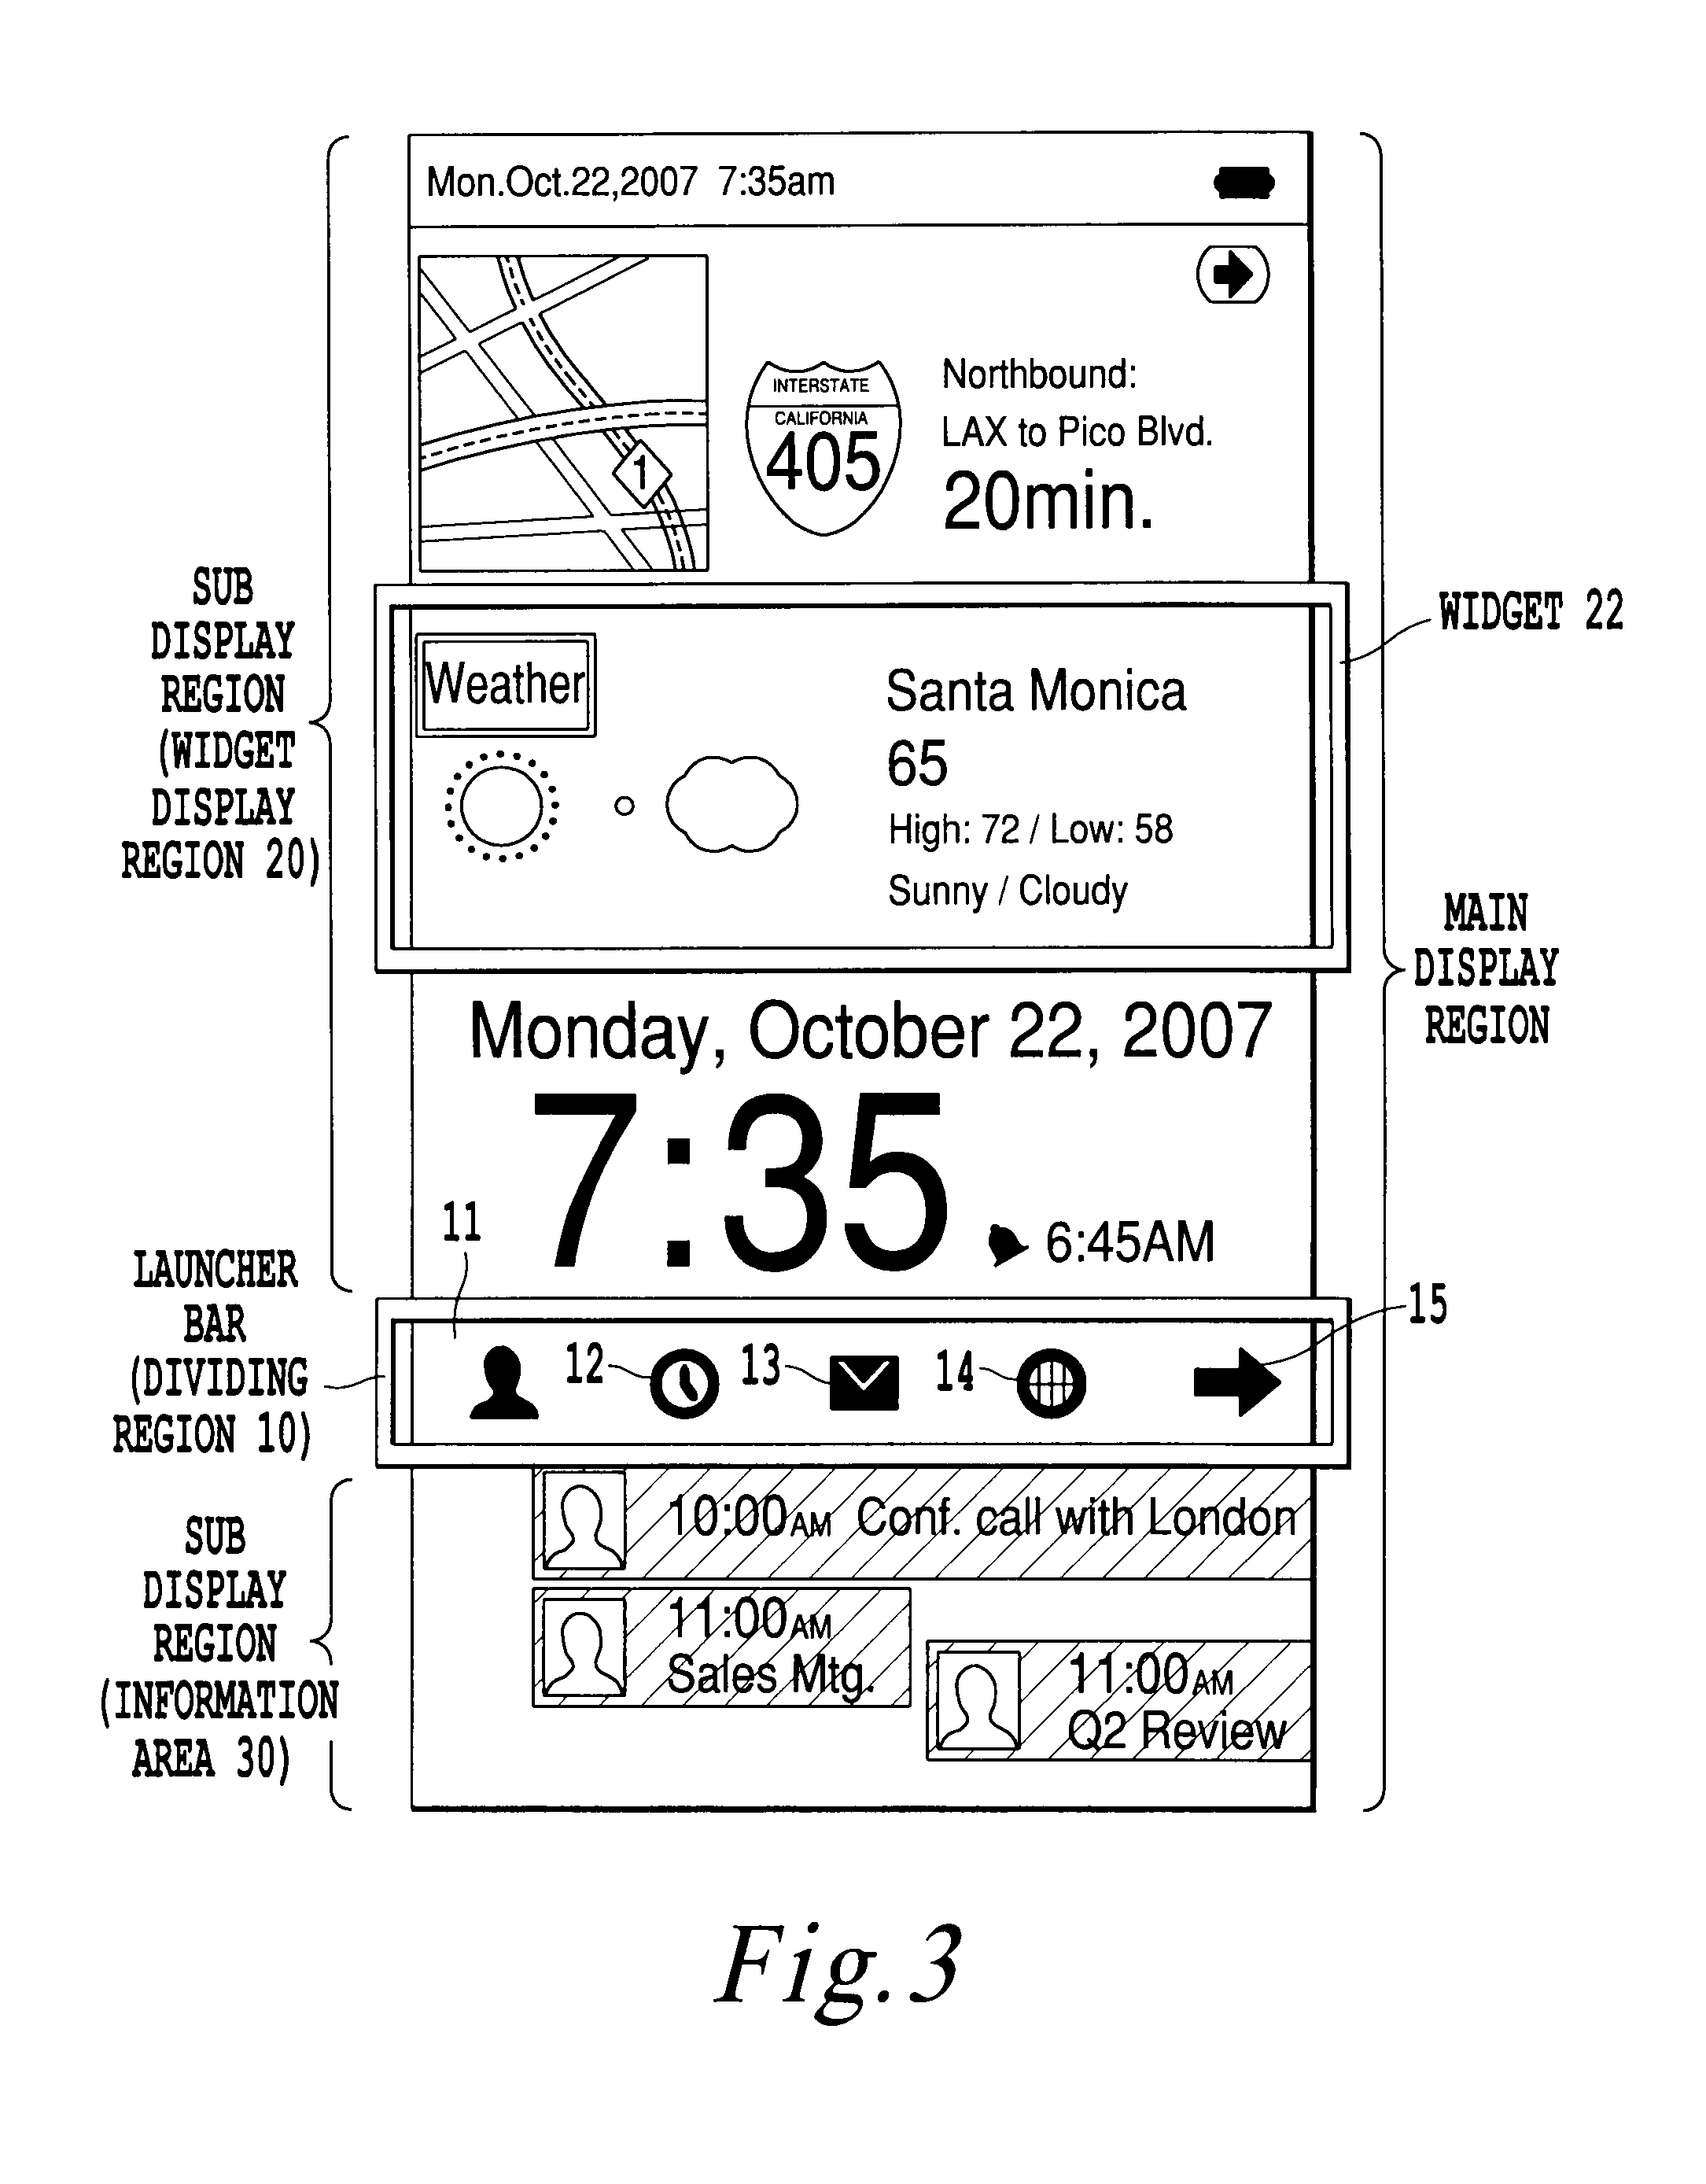 Computer implemented display, graphical user interface, design and method including scrolling features